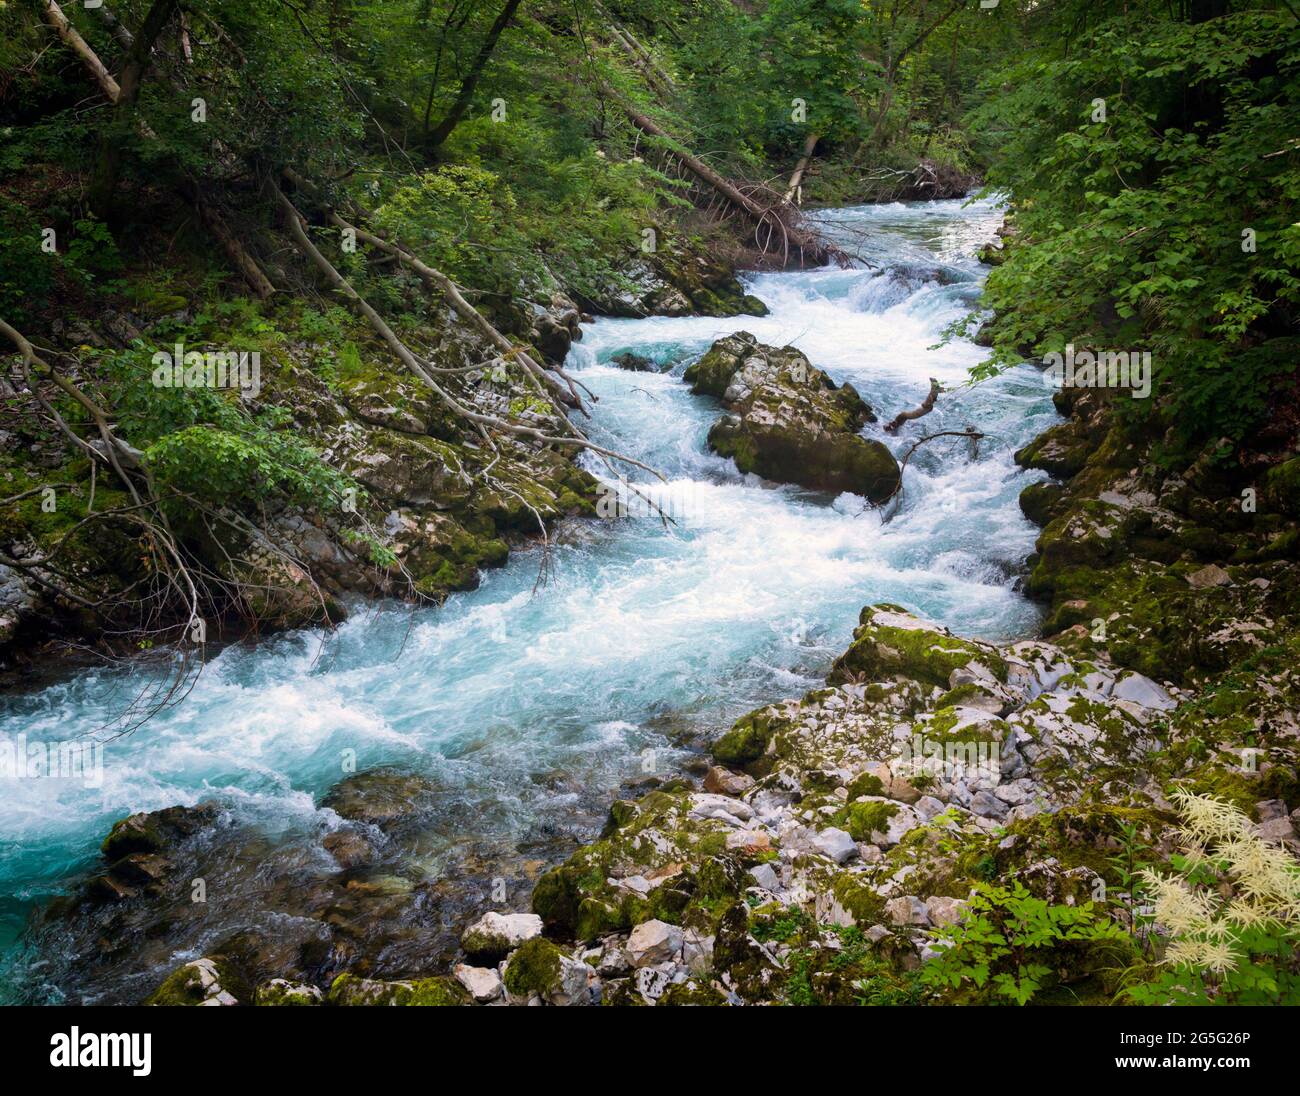 The Radovna river rushing through the Vintgar Gorge near Bled, Upper Carniola, Slovenia.  The gorge is in the Triglav National Park. Stock Photo